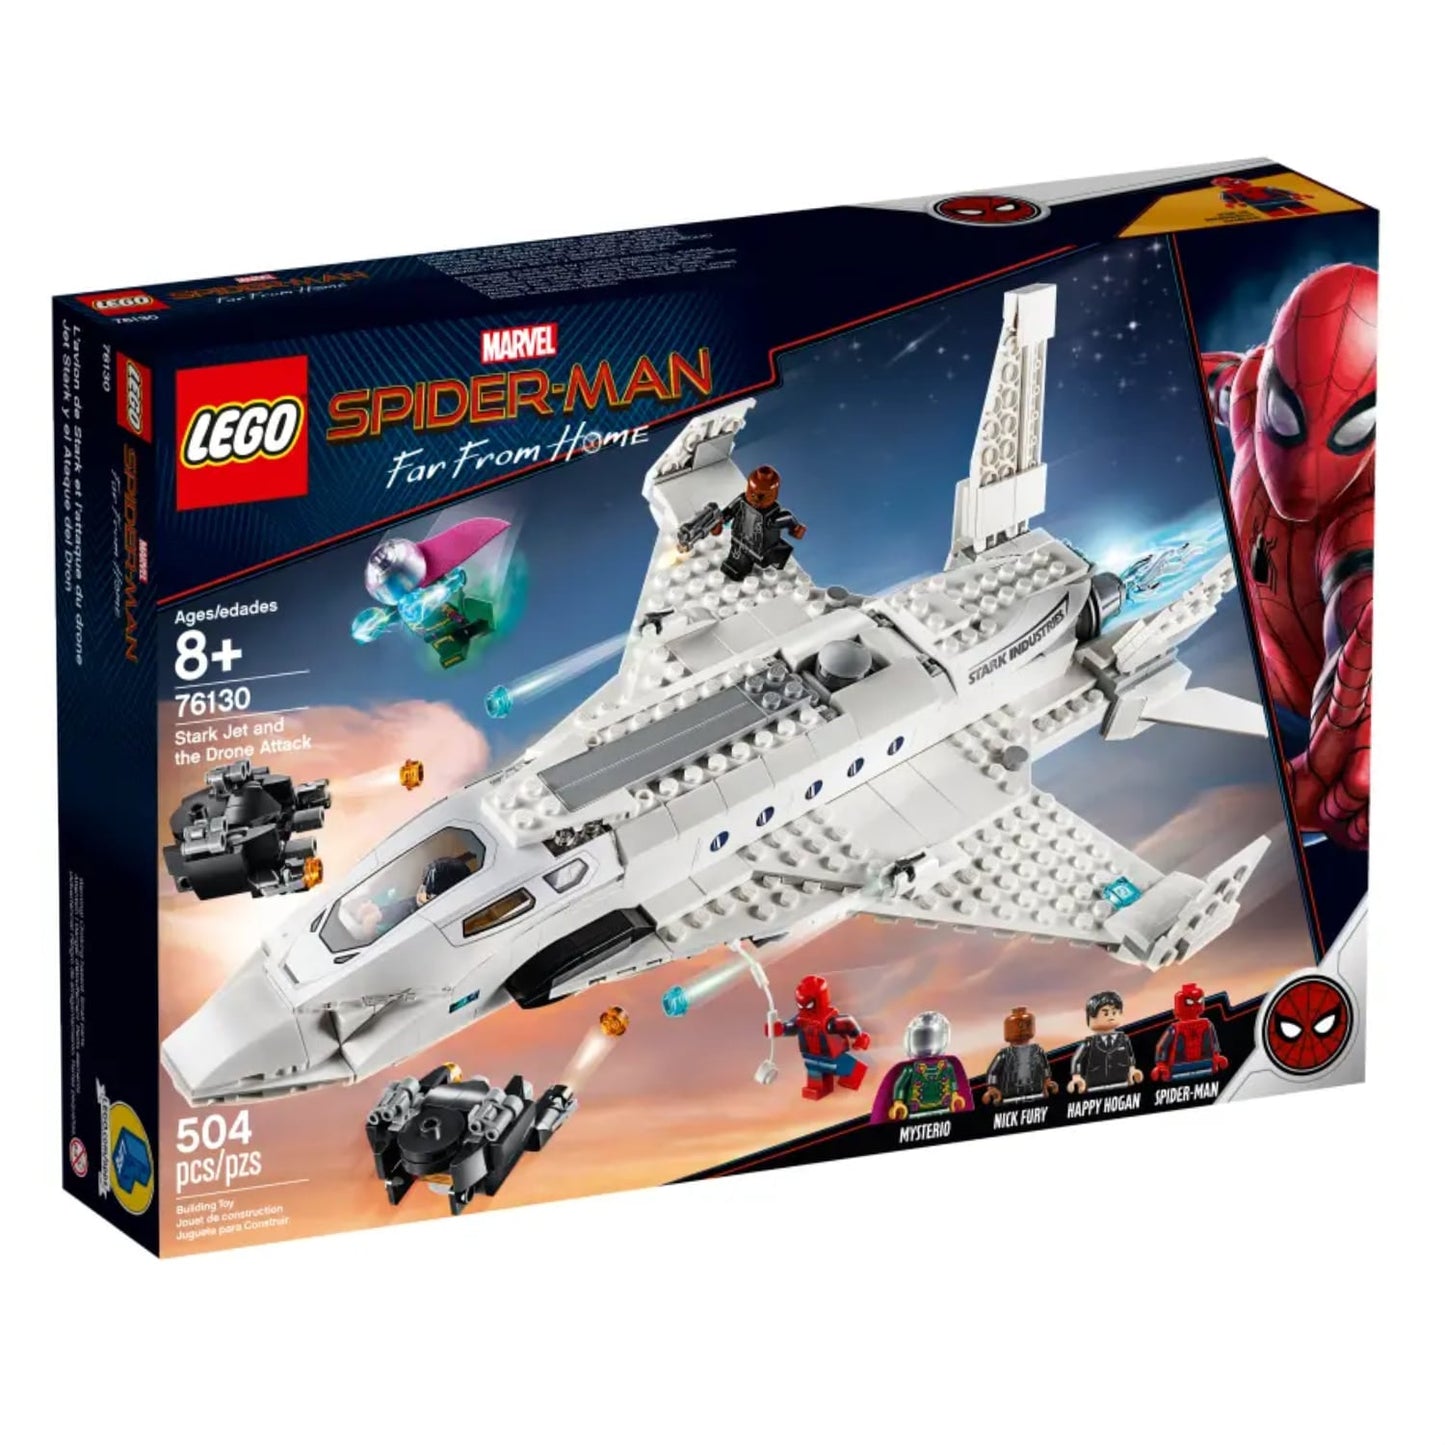 Lego 76130 Marvel Stark Jet and the Drone Attack